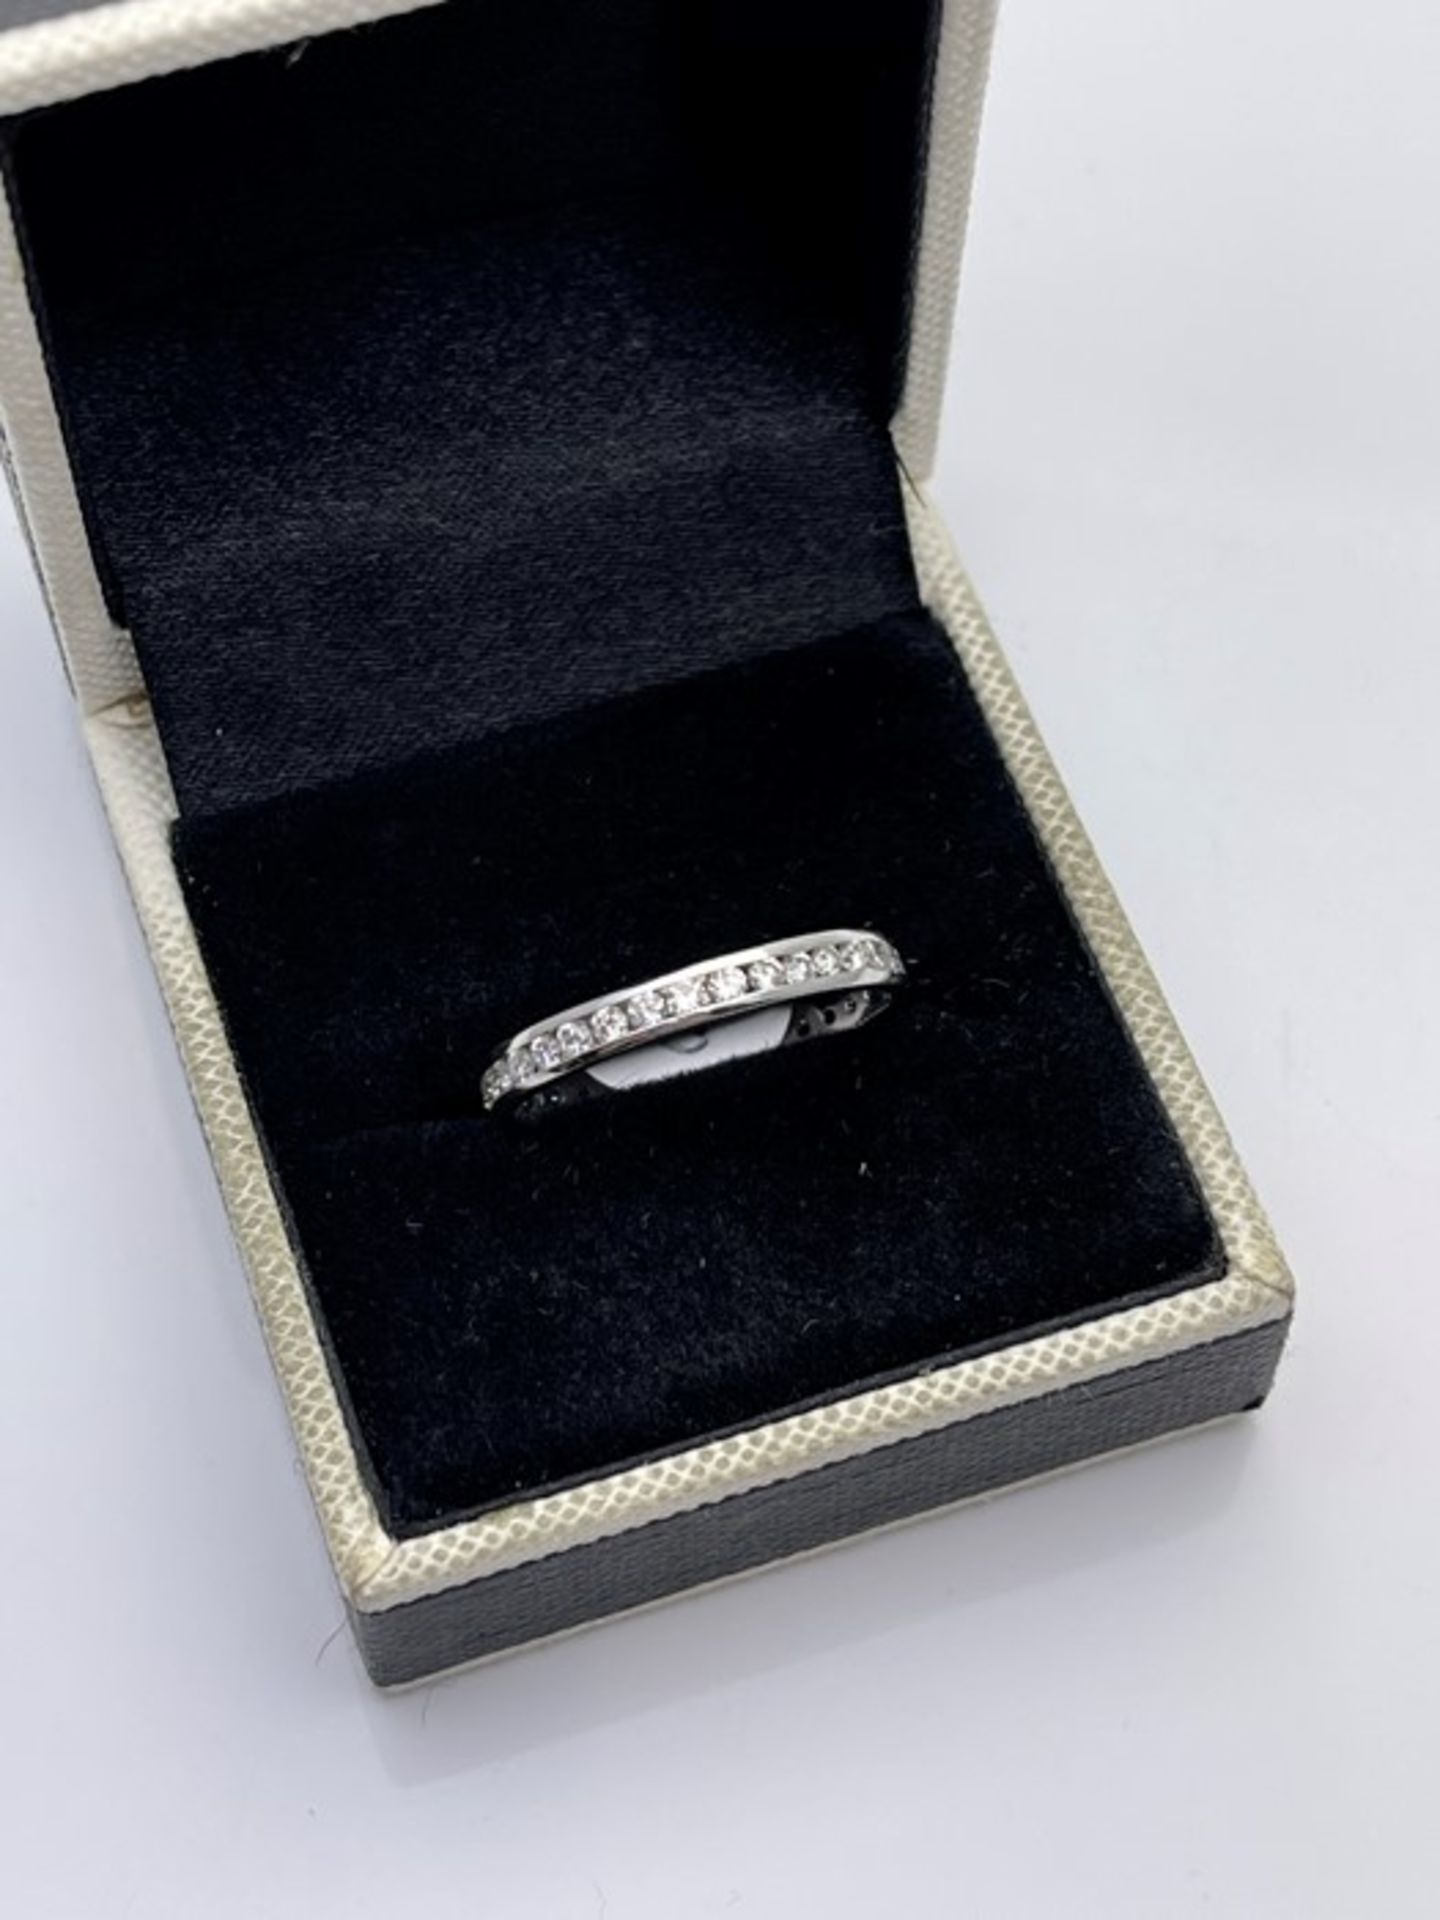 18CT WHITE GOLD FULL ETERNITY DIAMOND RING, SET WITH BRILLIANT ROUND CUT DIAMONDS GOING ALL THE